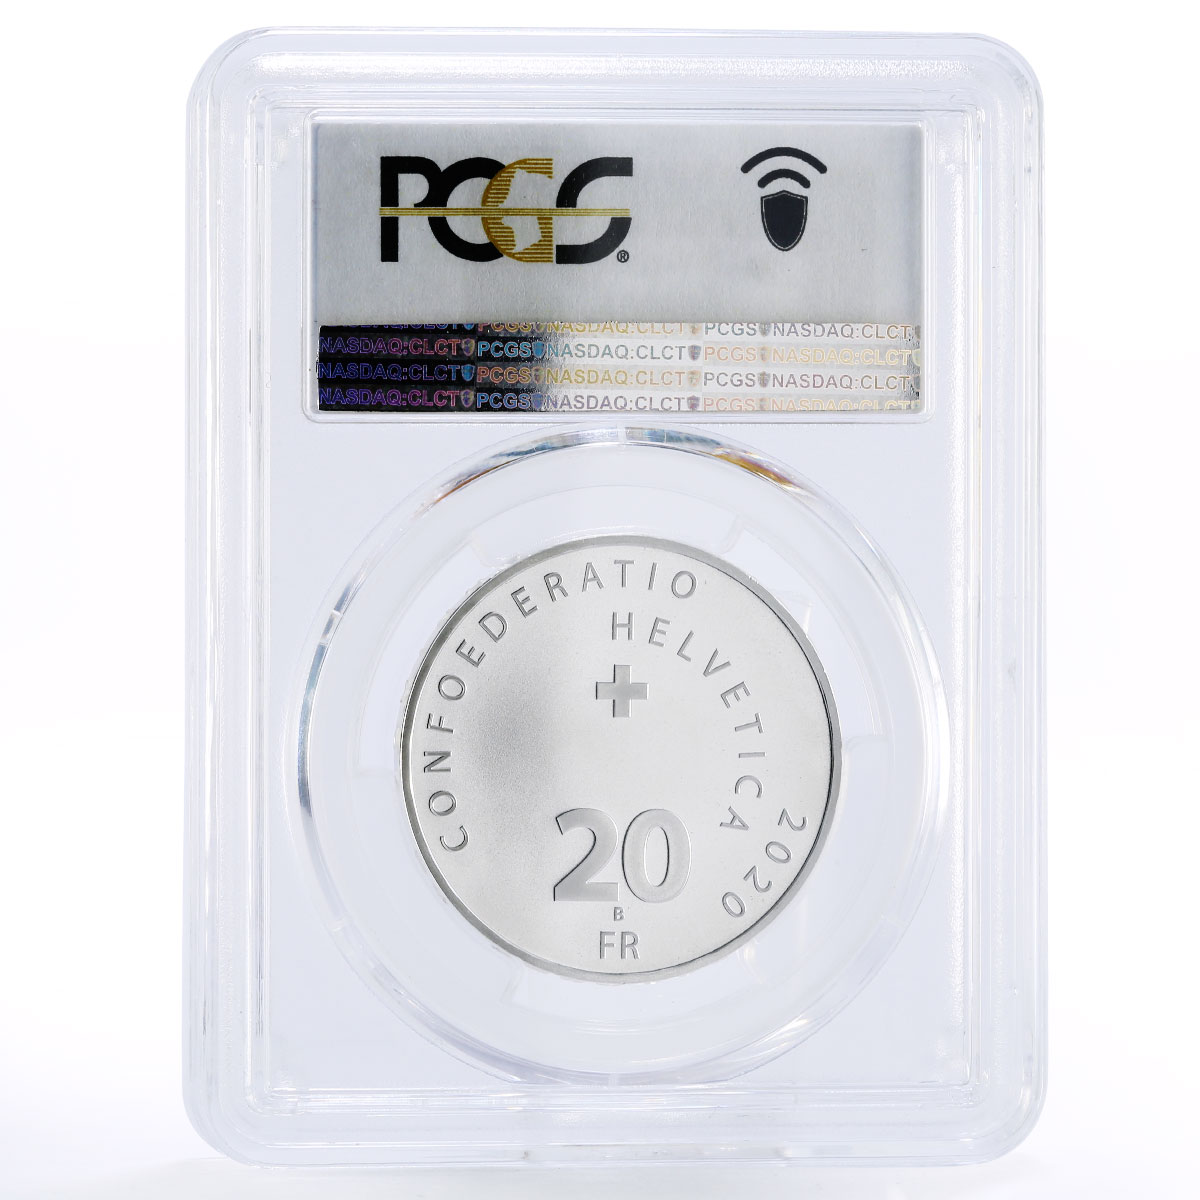 Switzerland 20 francs Tennisist Roger Federer Sports MS69 PCGS silver coin 2020